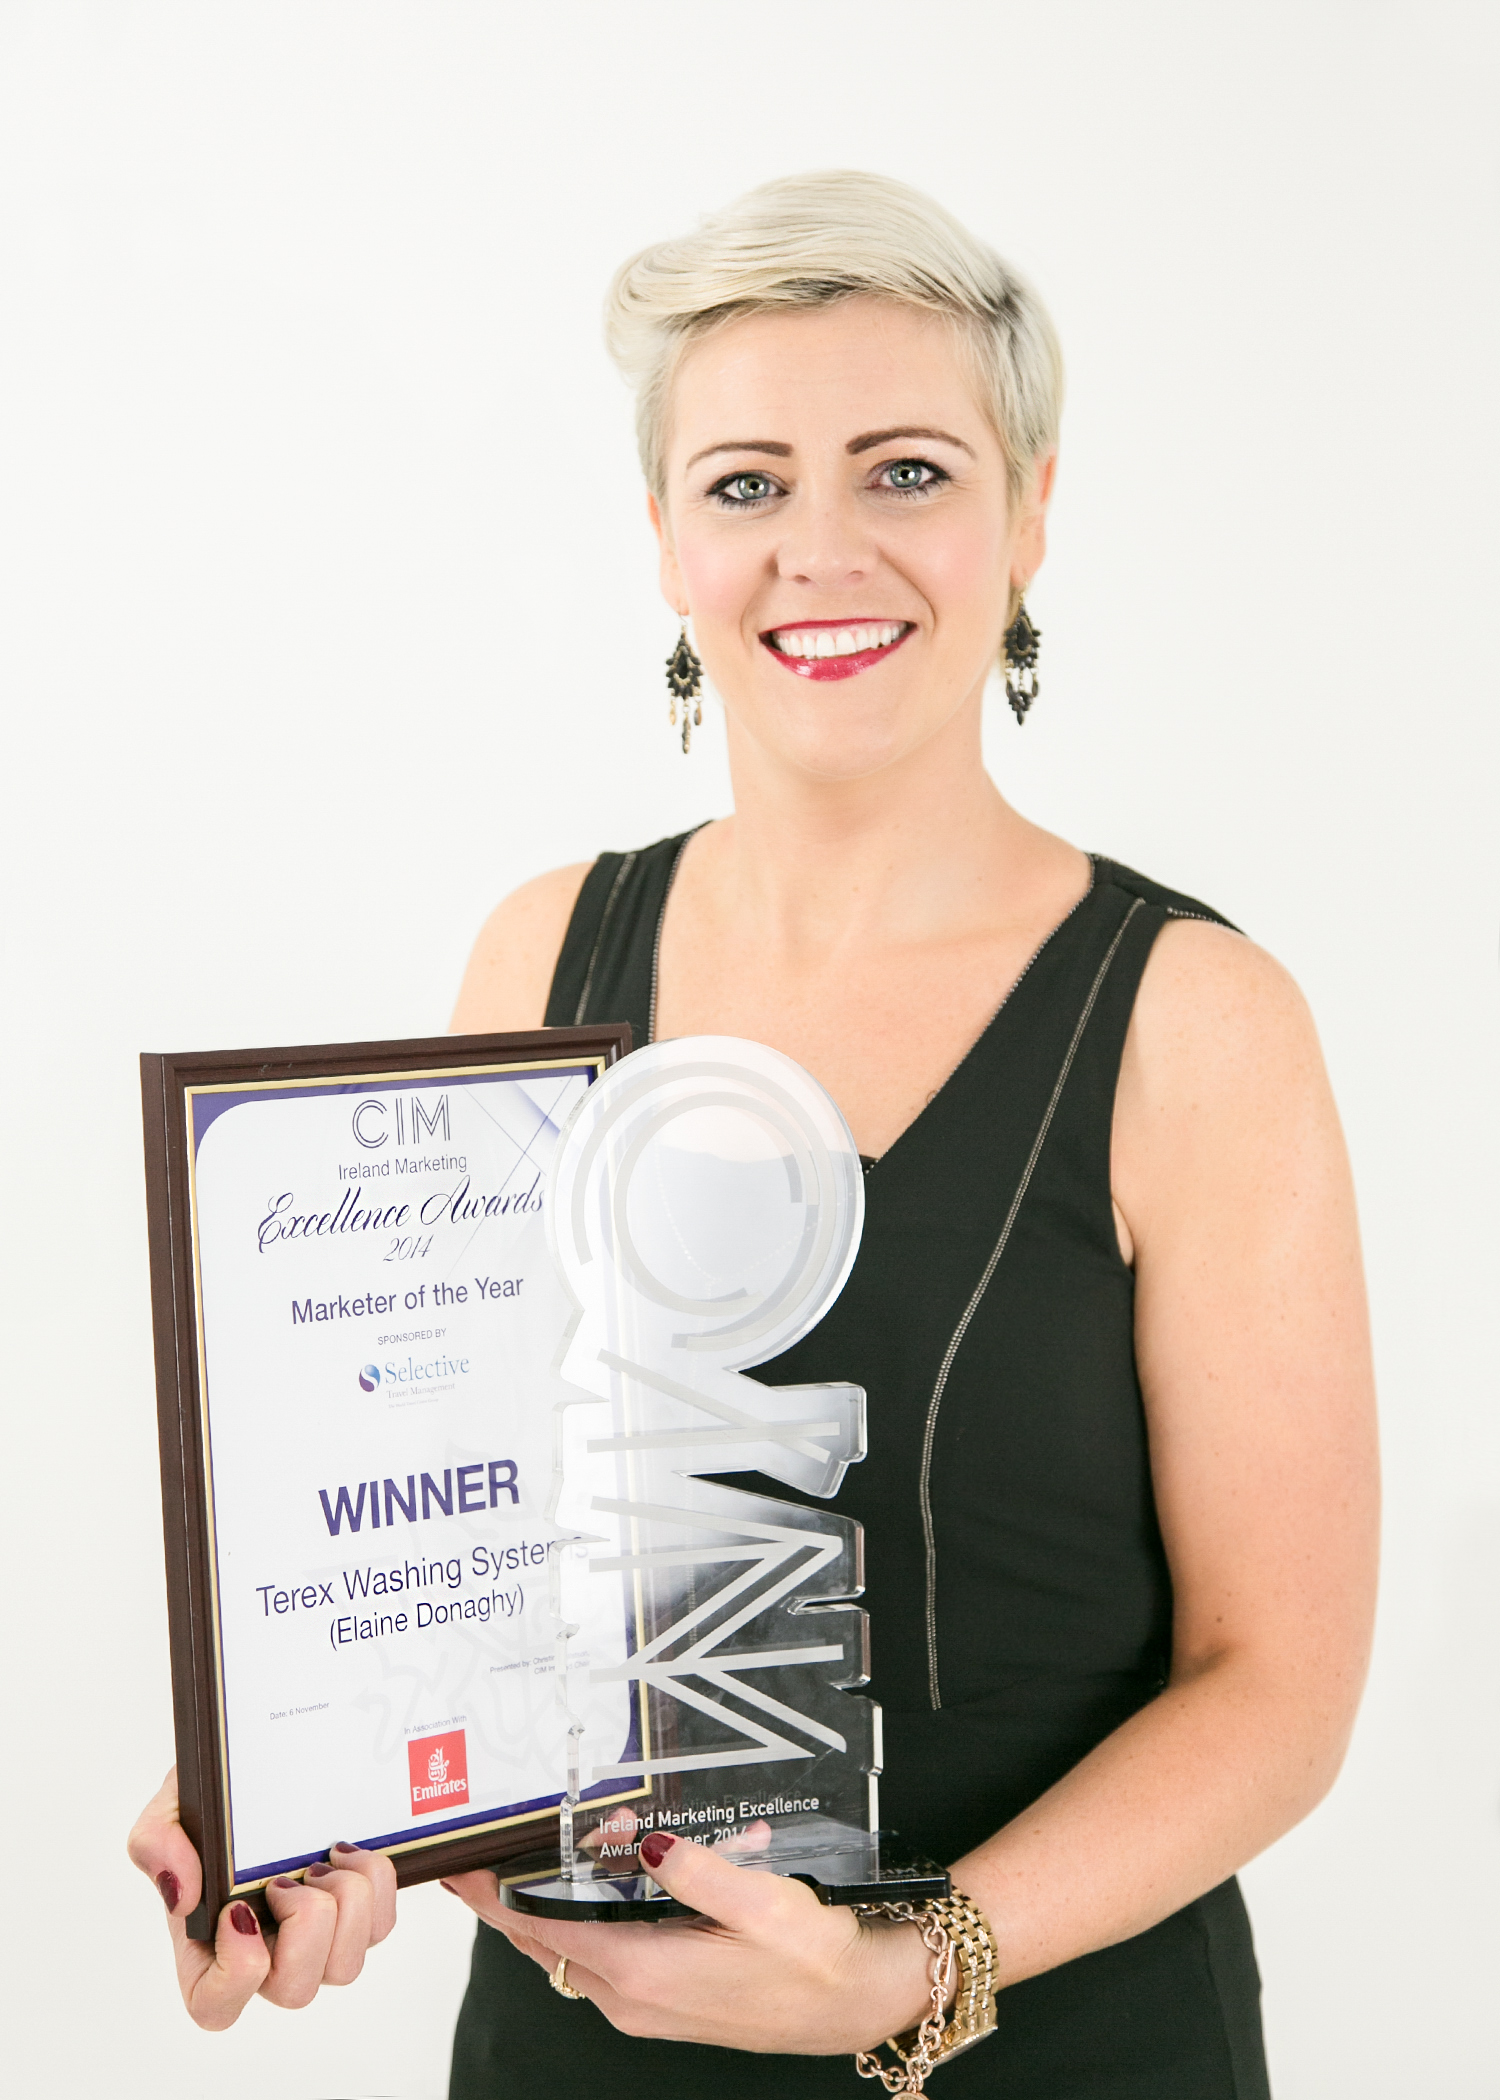 Elaine Donaghy with her marketer award